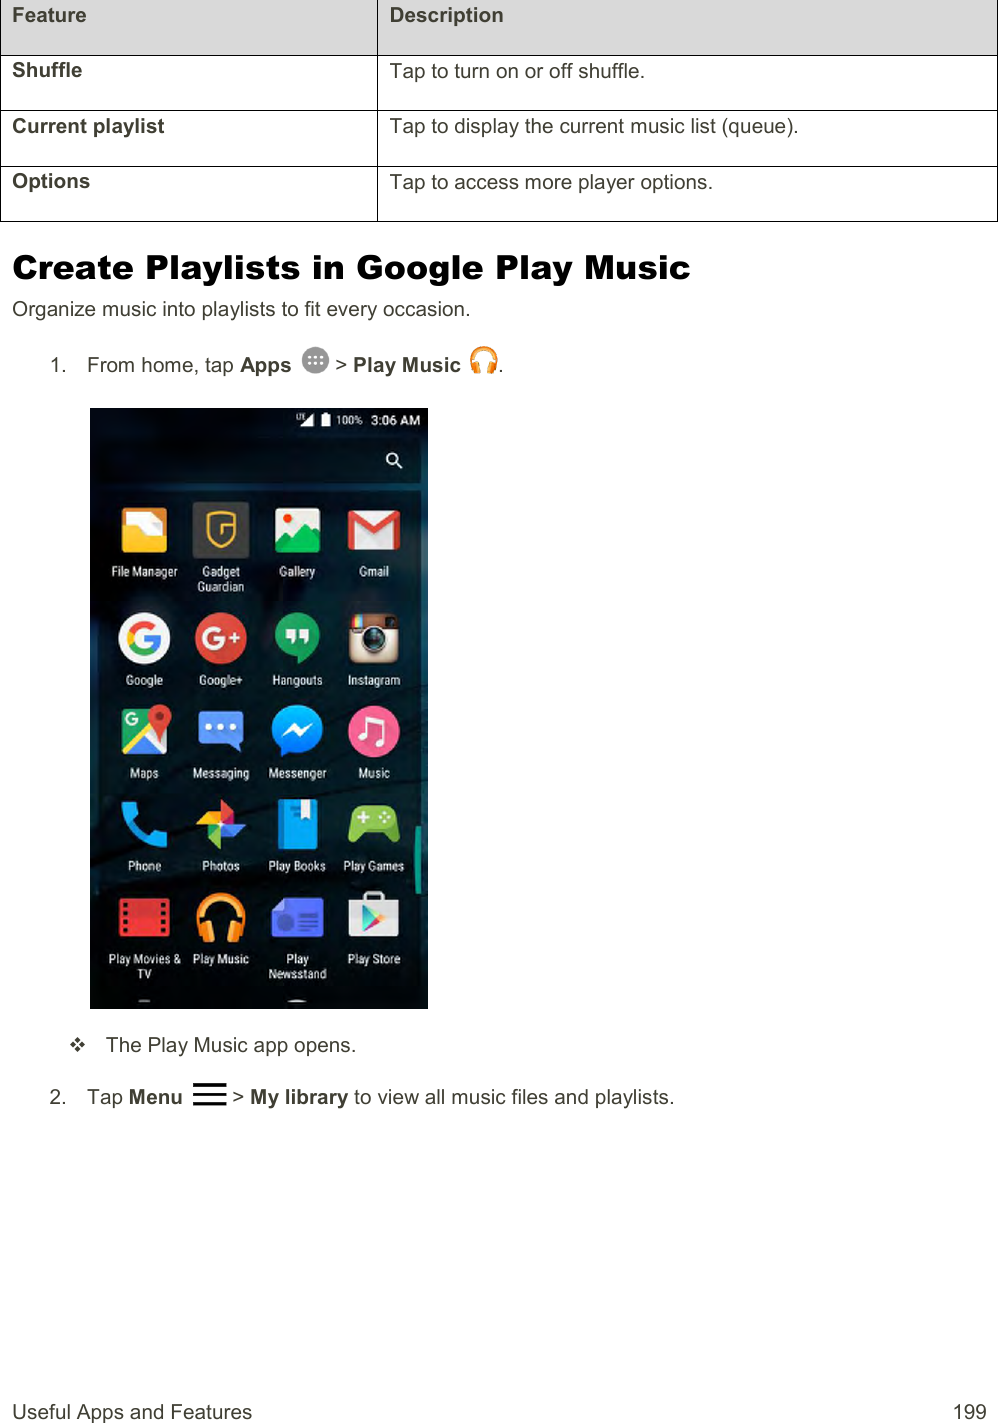 Useful Apps and Features  199 Feature Description Shuffle Tap to turn on or off shuffle. Current playlist Tap to display the current music list (queue). Options Tap to access more player options. Create Playlists in Google Play Music Organize music into playlists to fit every occasion. 1.  From home, tap Apps   &gt; Play Music  .     The Play Music app opens. 2.  Tap Menu   &gt; My library to view all music files and playlists. 